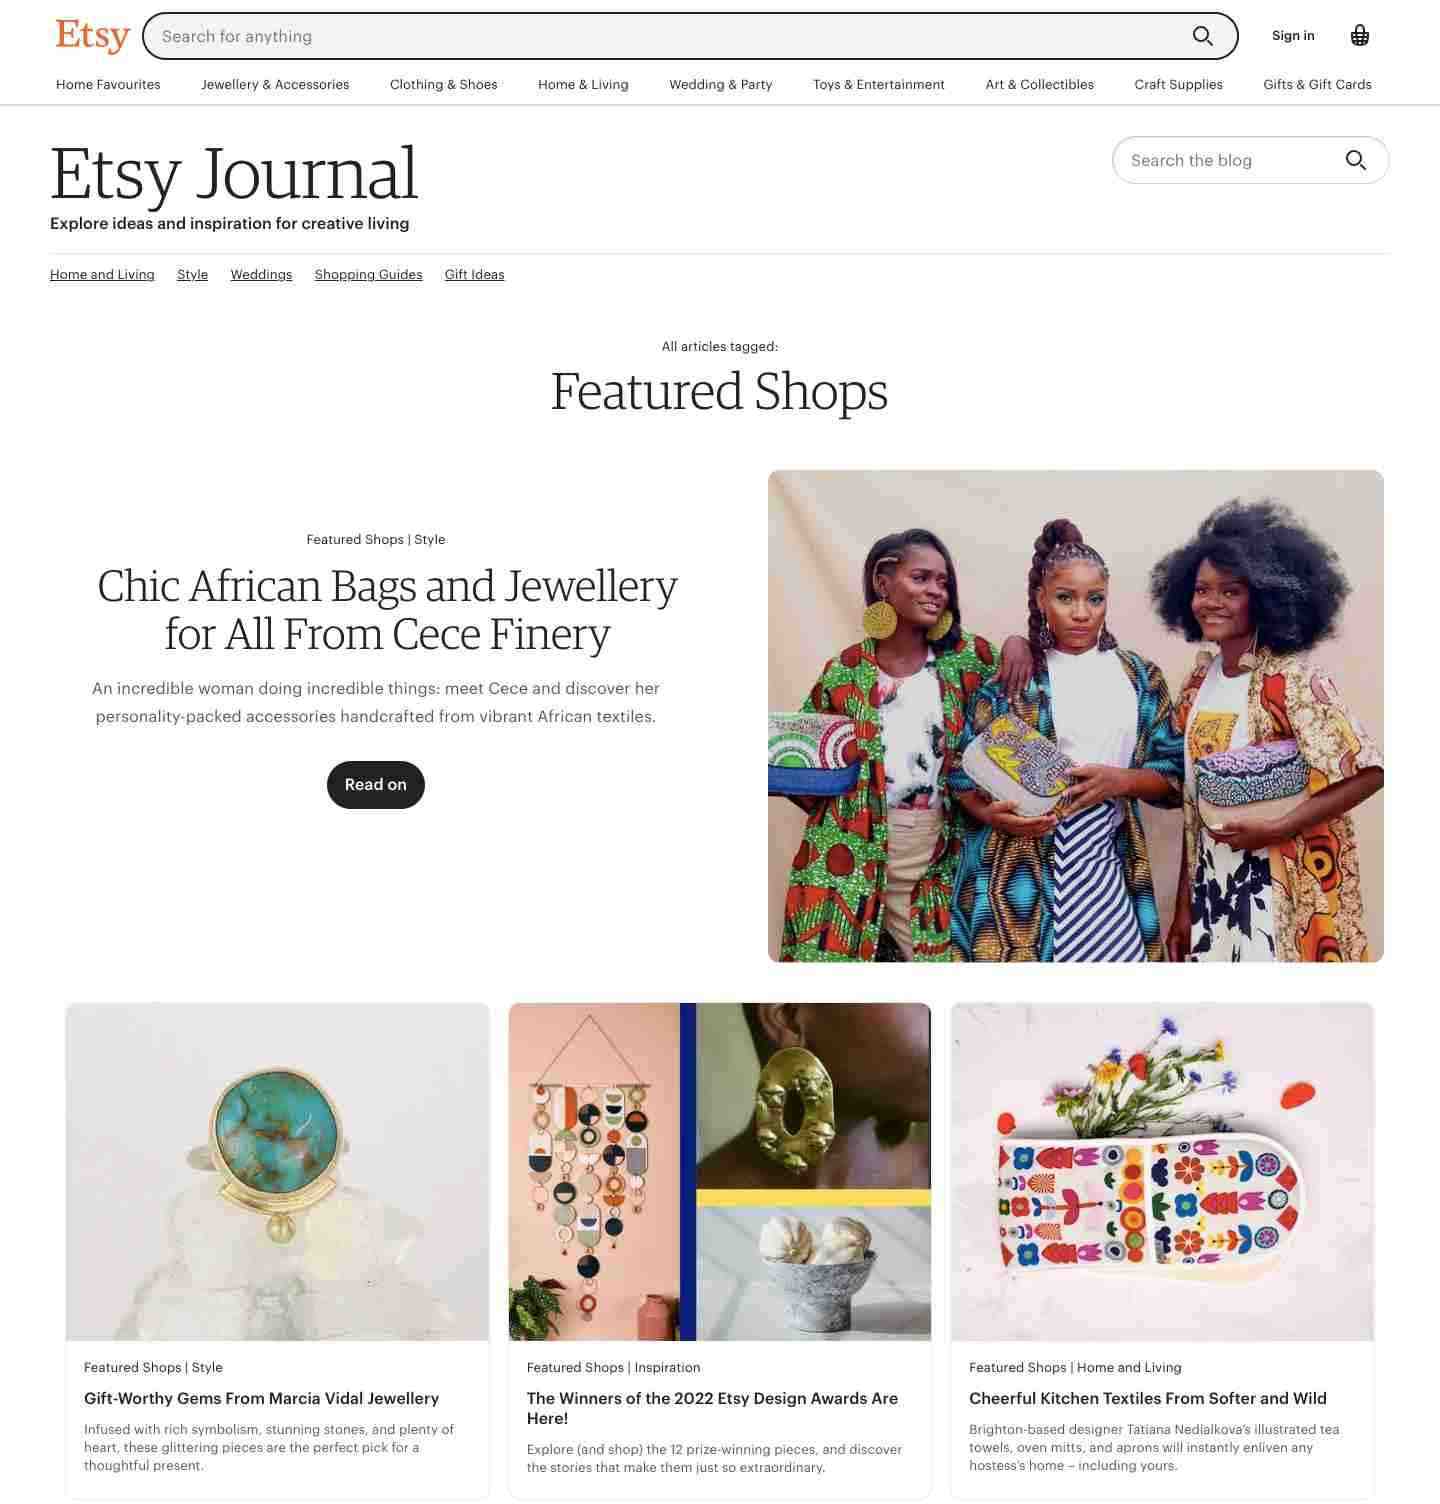 Featured shops in Etsy Journal